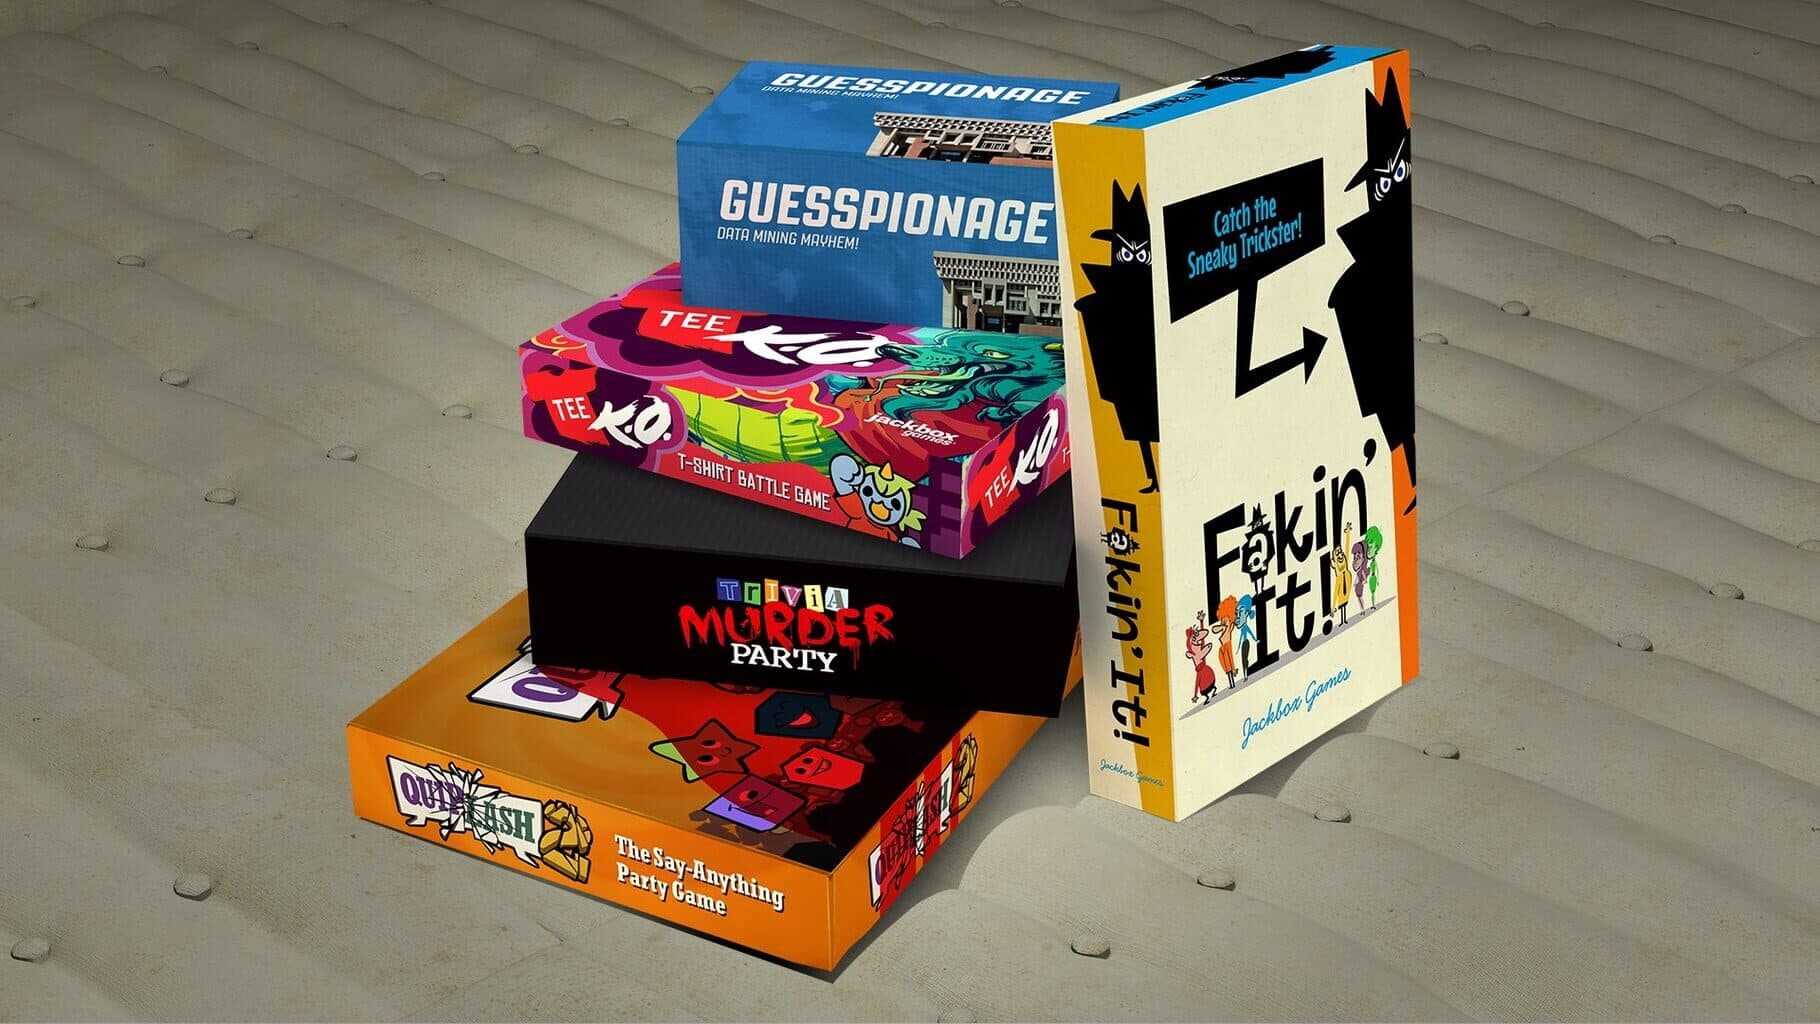 The Jackbox Party Pack 3 Image